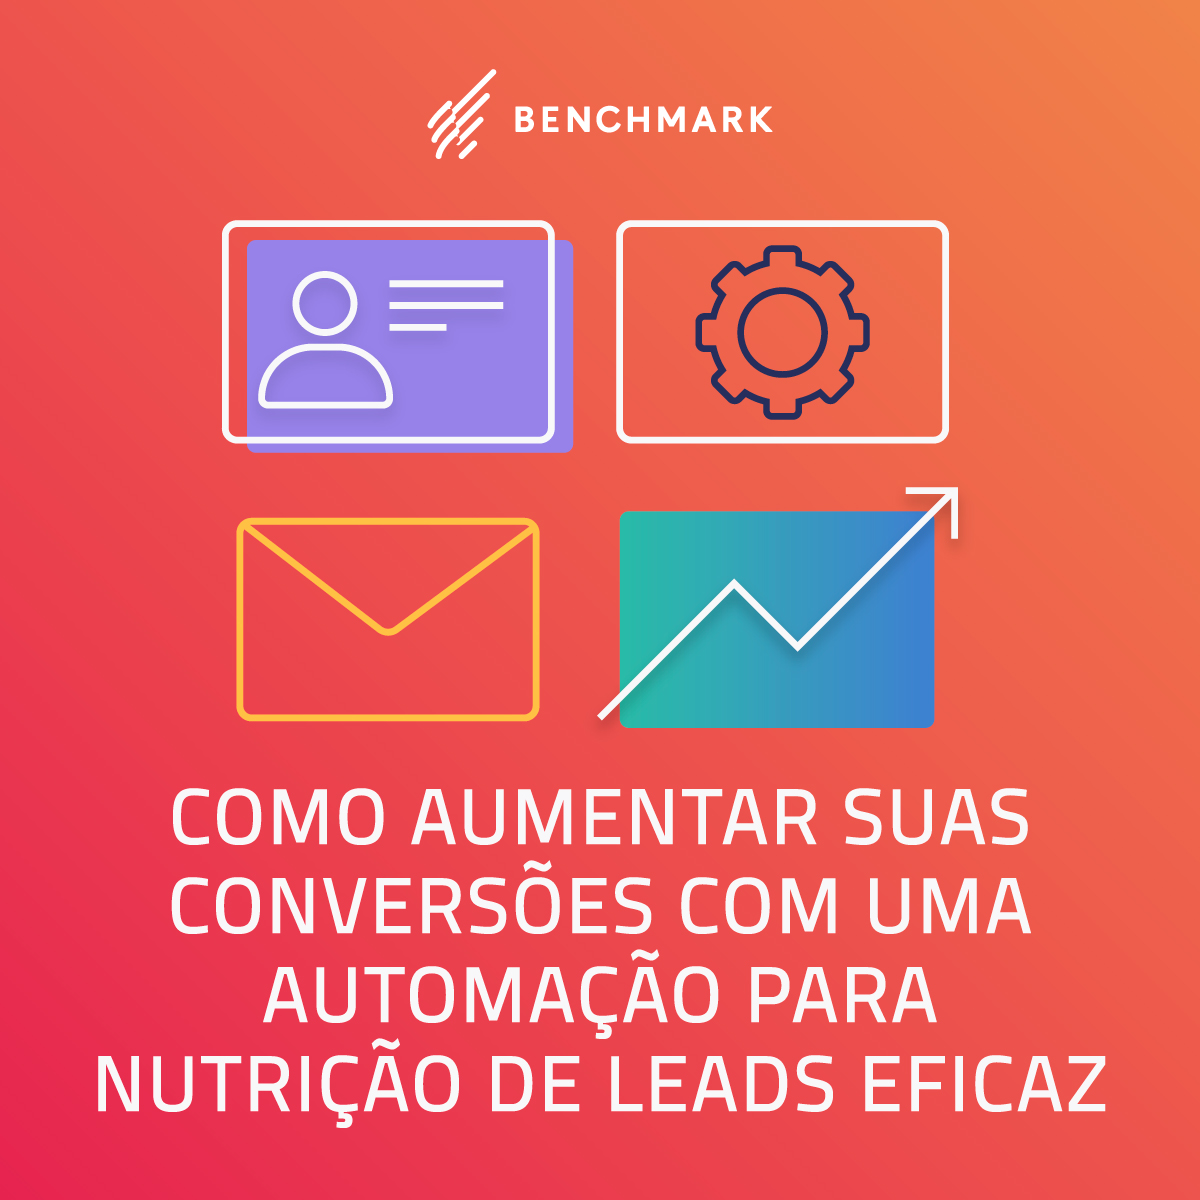 How To Improve Conversions With An Effective Lead Nurturing Email Automation